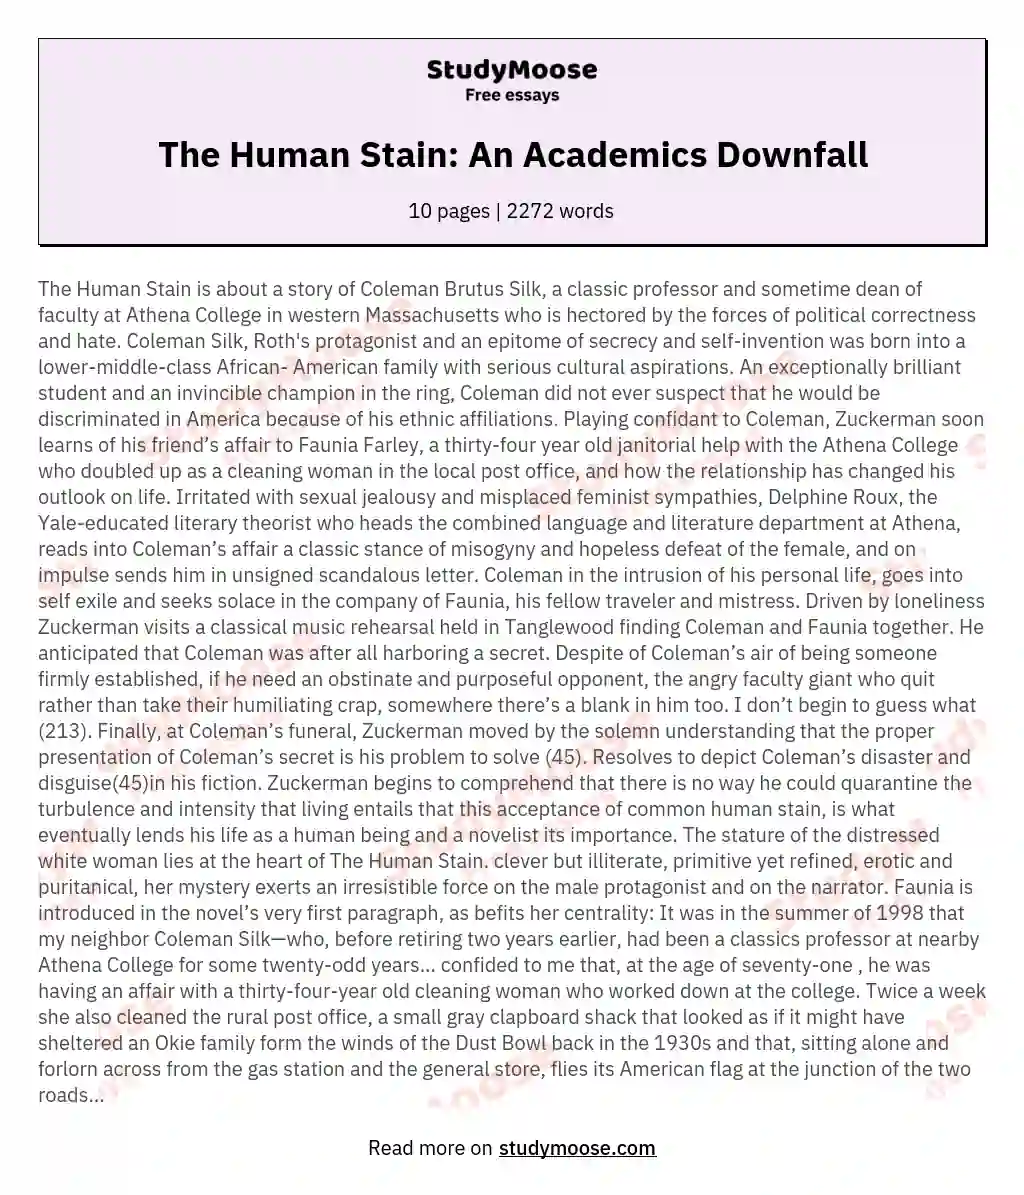 The Human Stain: An Academics Downfall essay